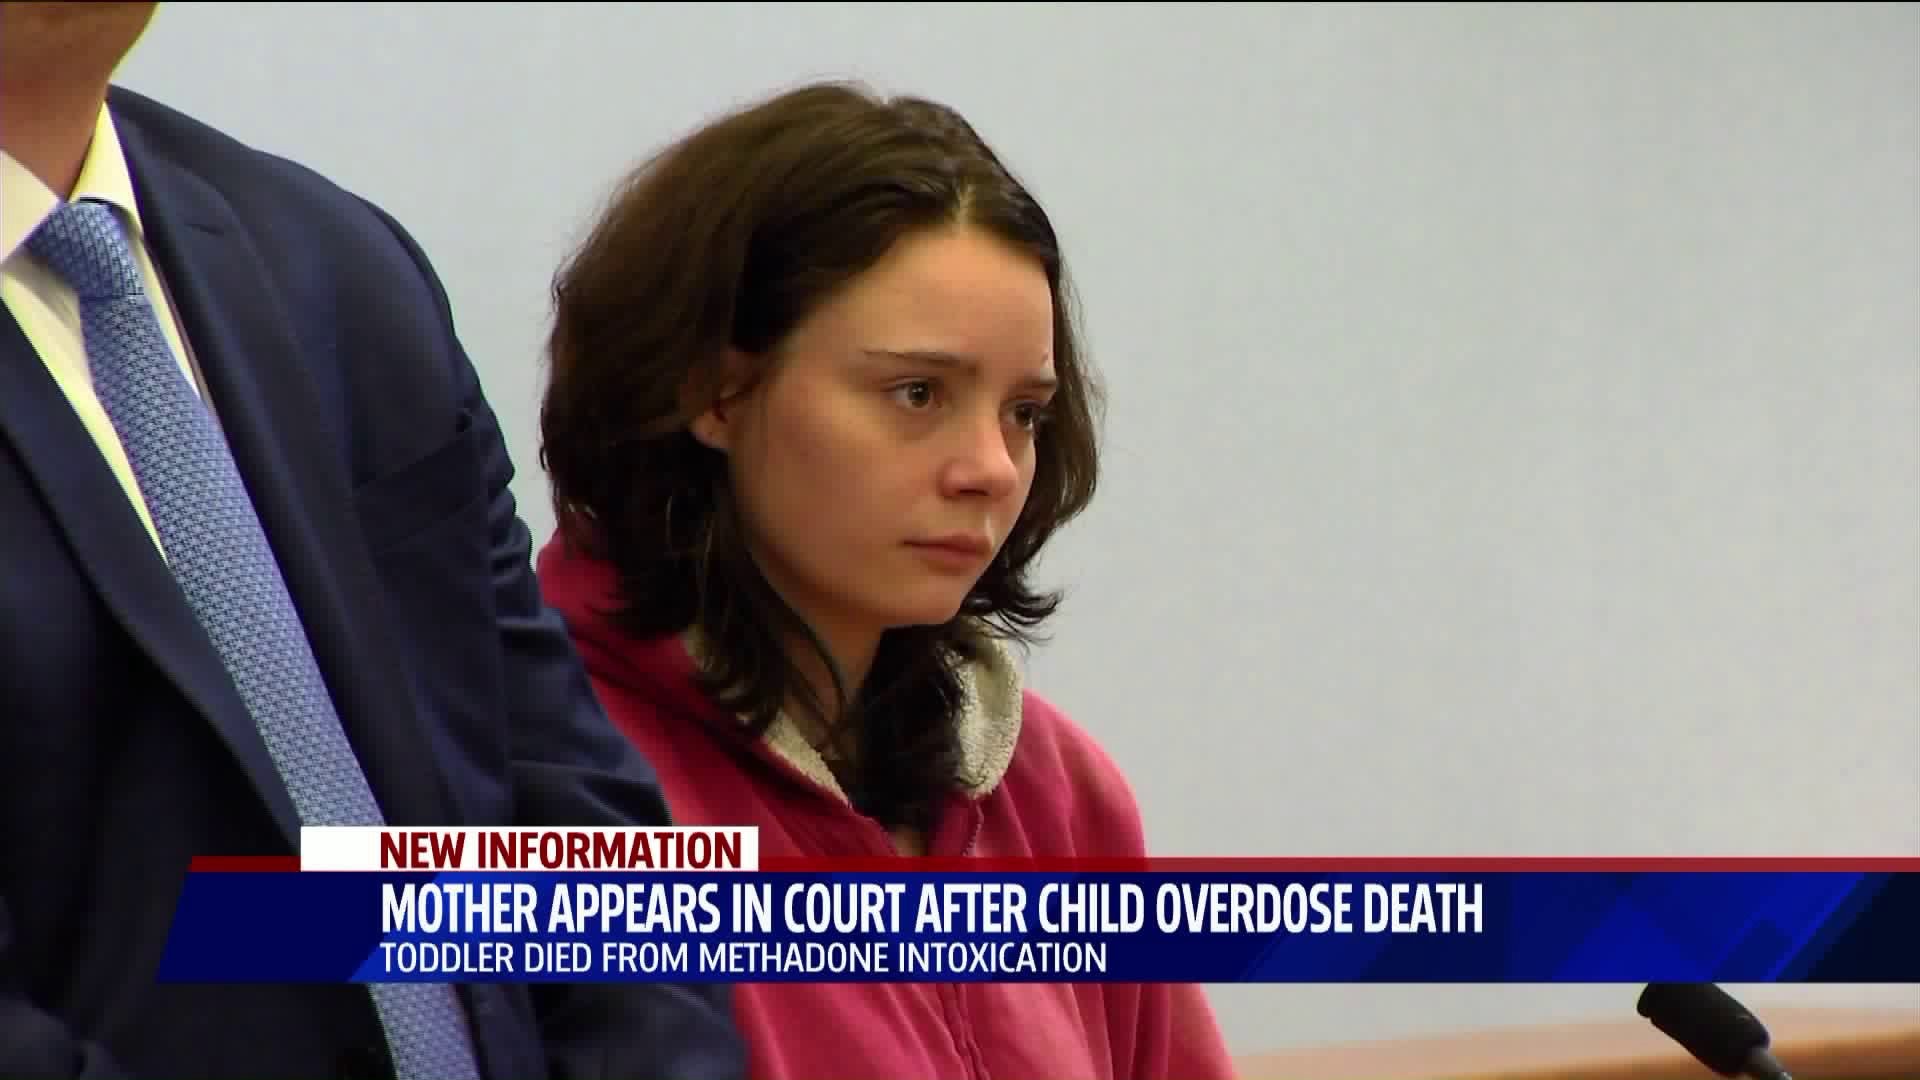 Stafford mother charged with death of 3-year-old in court